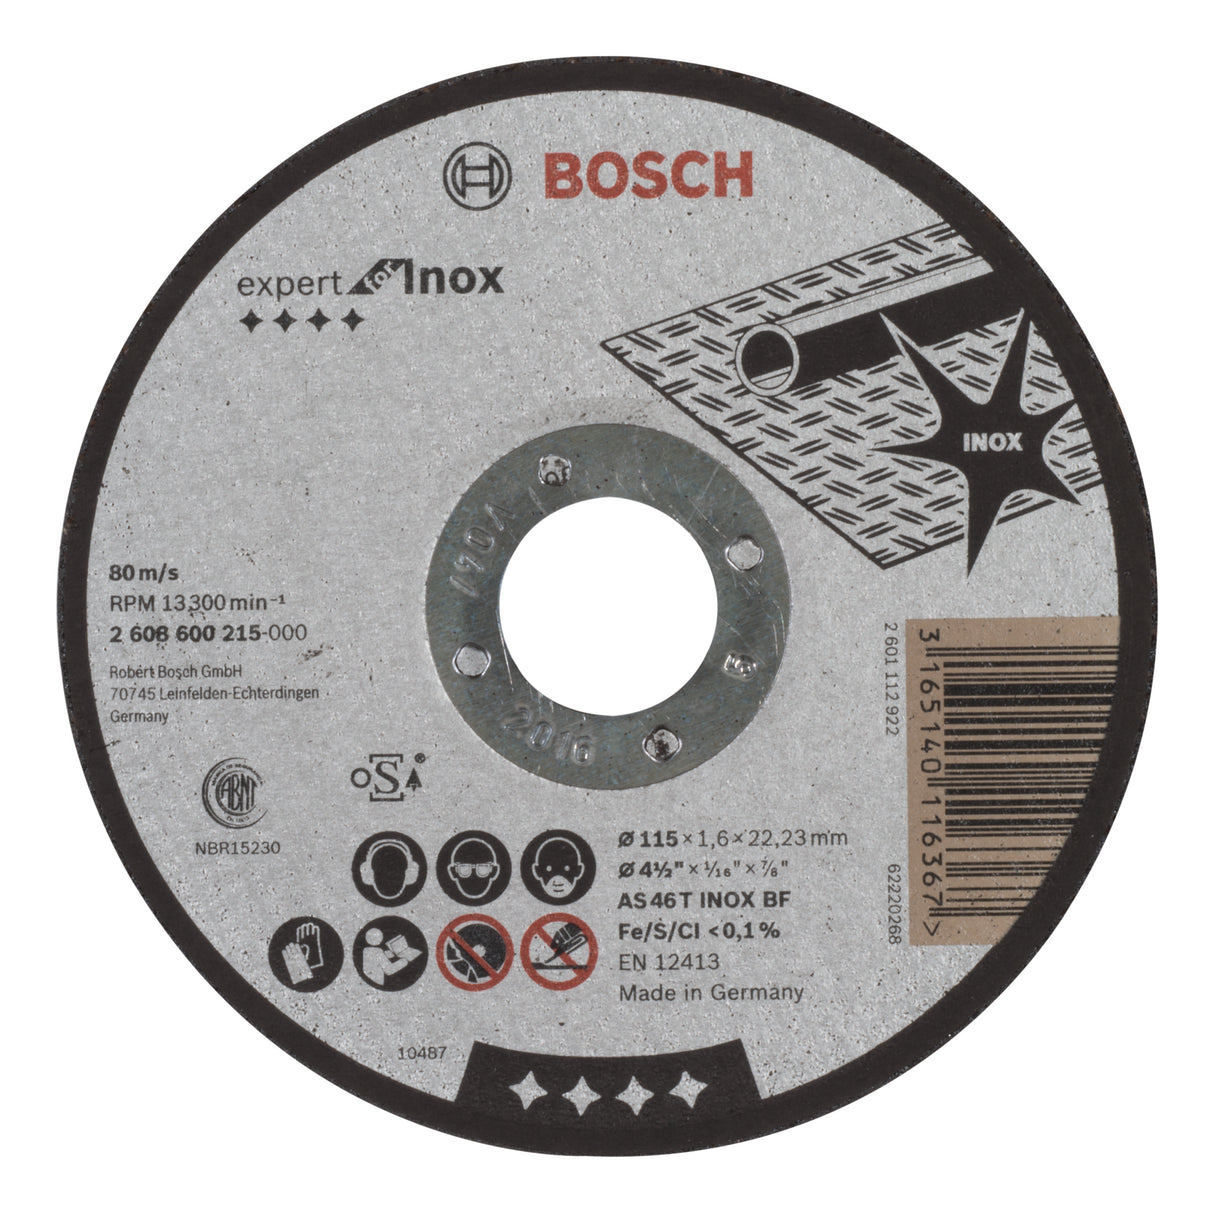 Bosch Professional Expert AS 46 T INOX BF Straight Cutting Disc for Inox, 115mm x 1.6mm